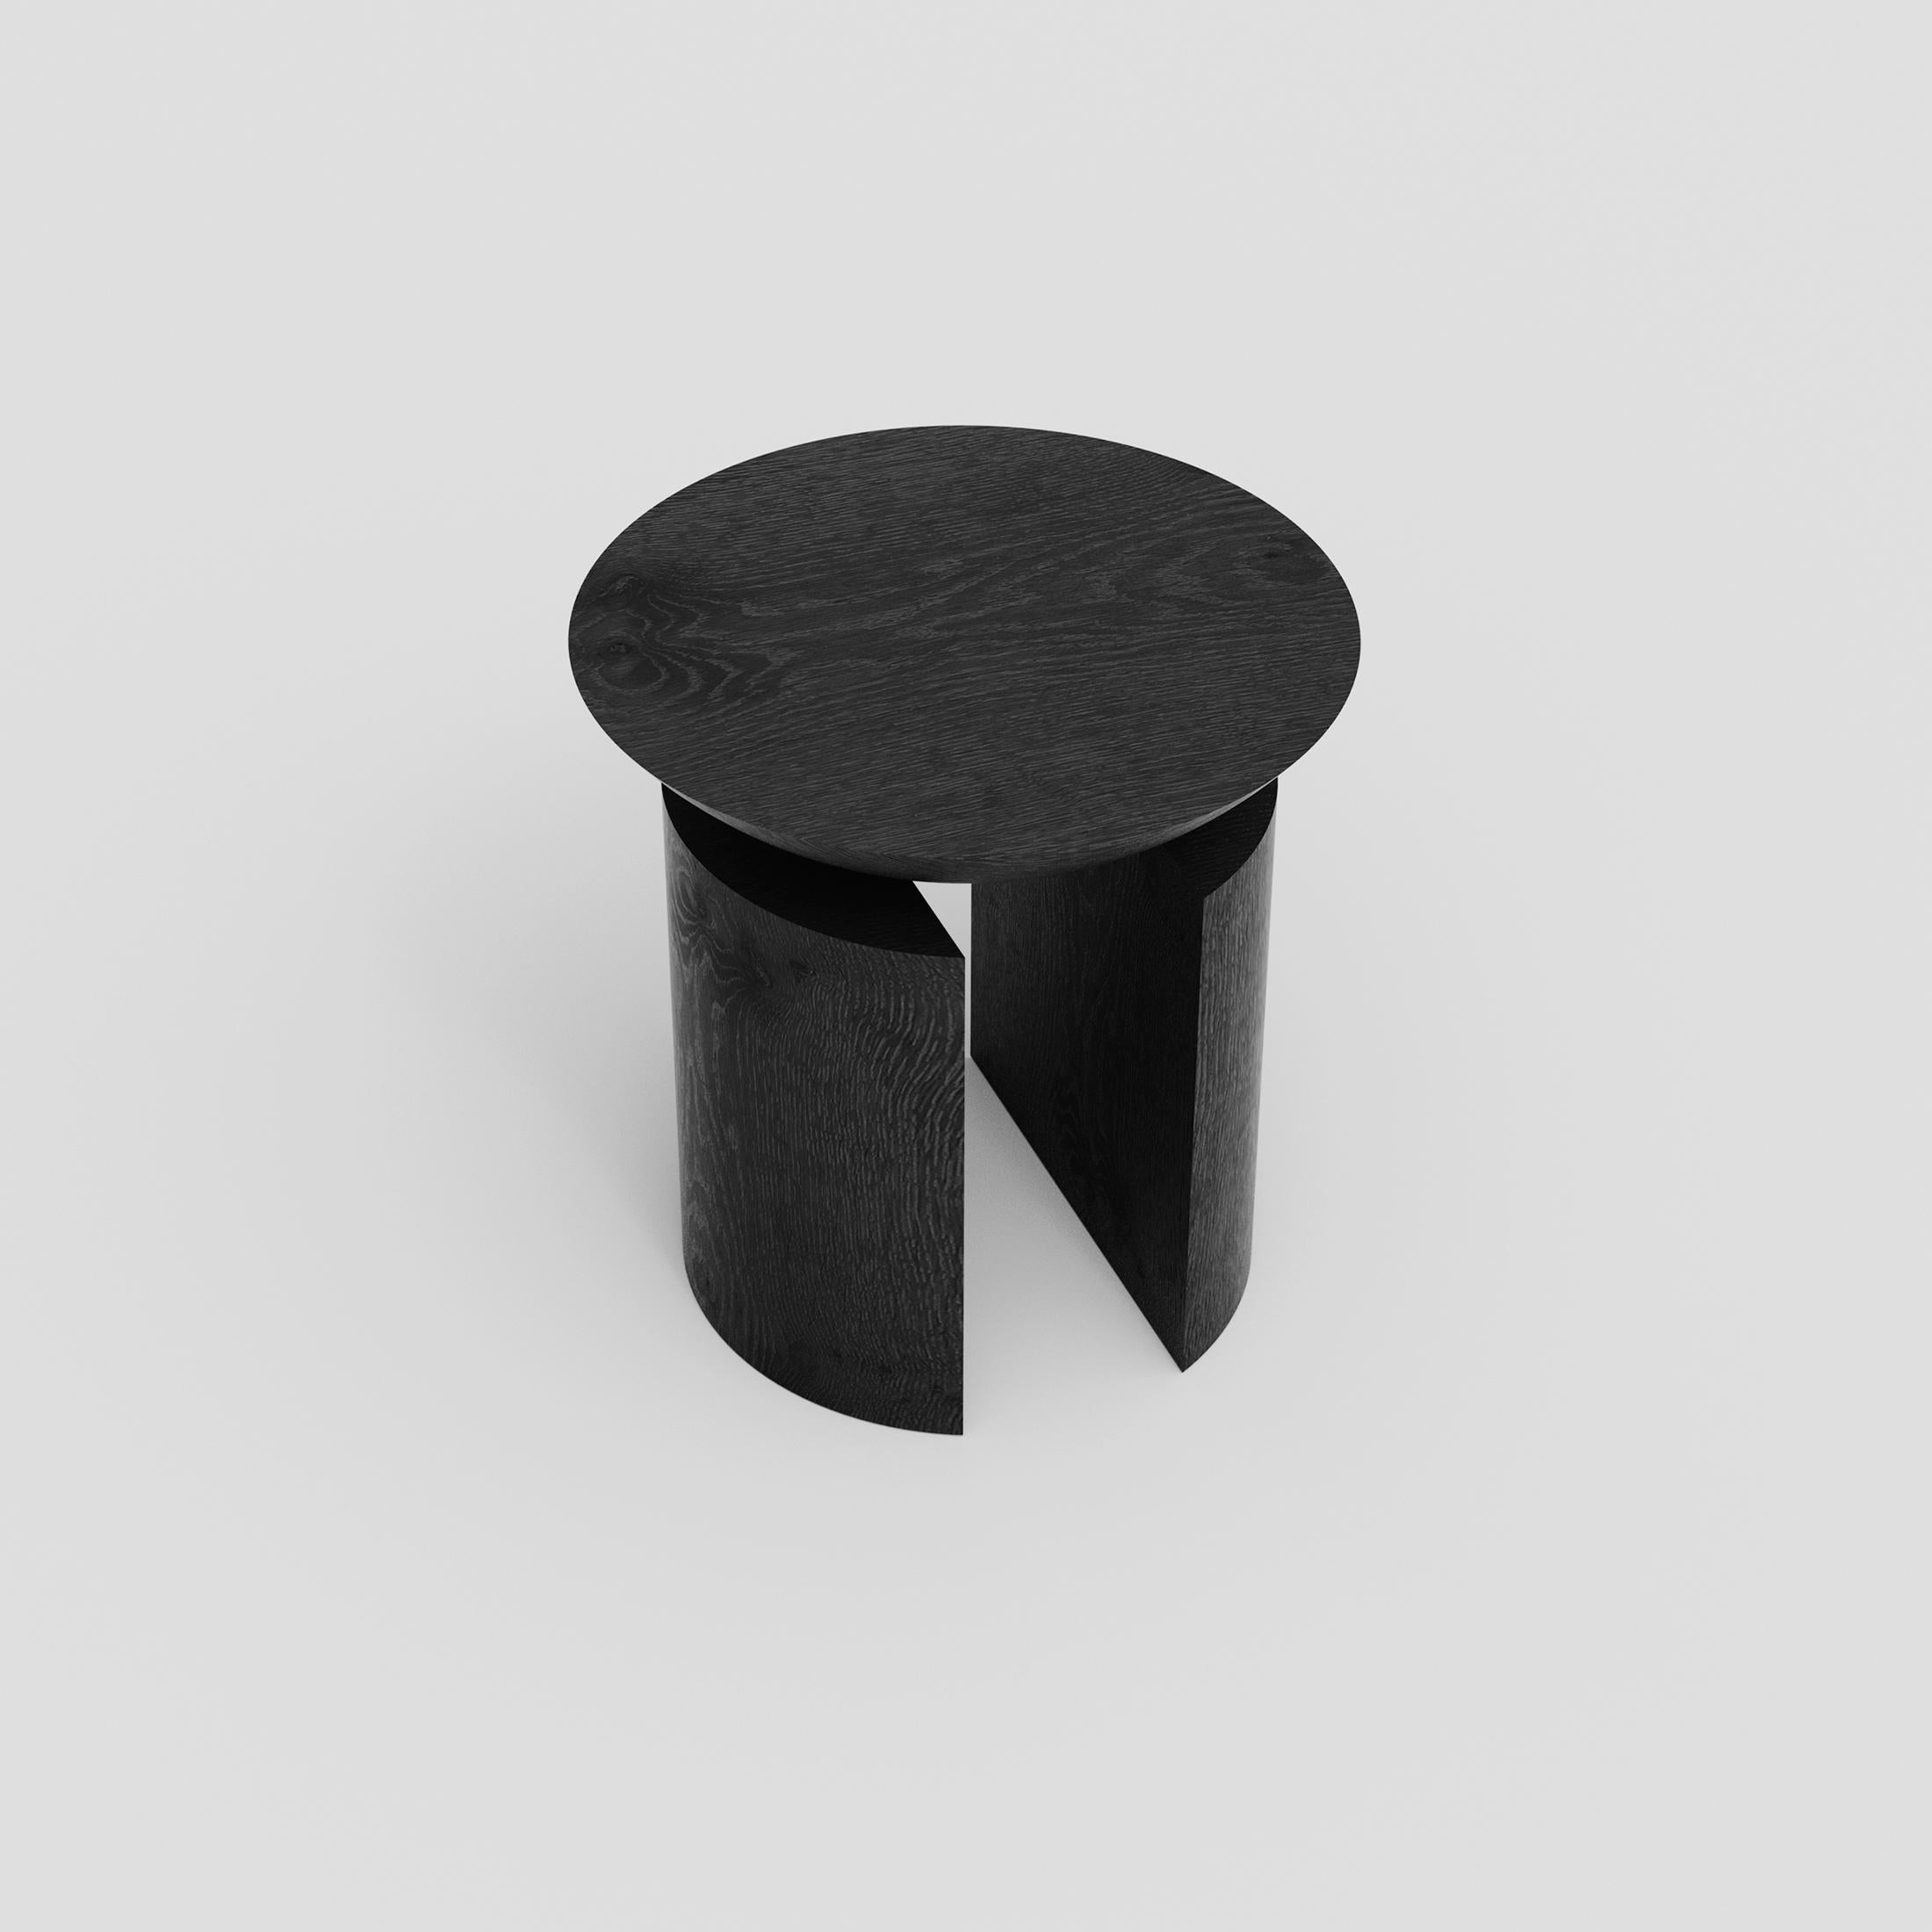 Minimalist Anca Sculptural Side Table or Stool in Tropical Hardwood by Pedro Paulo Venzon